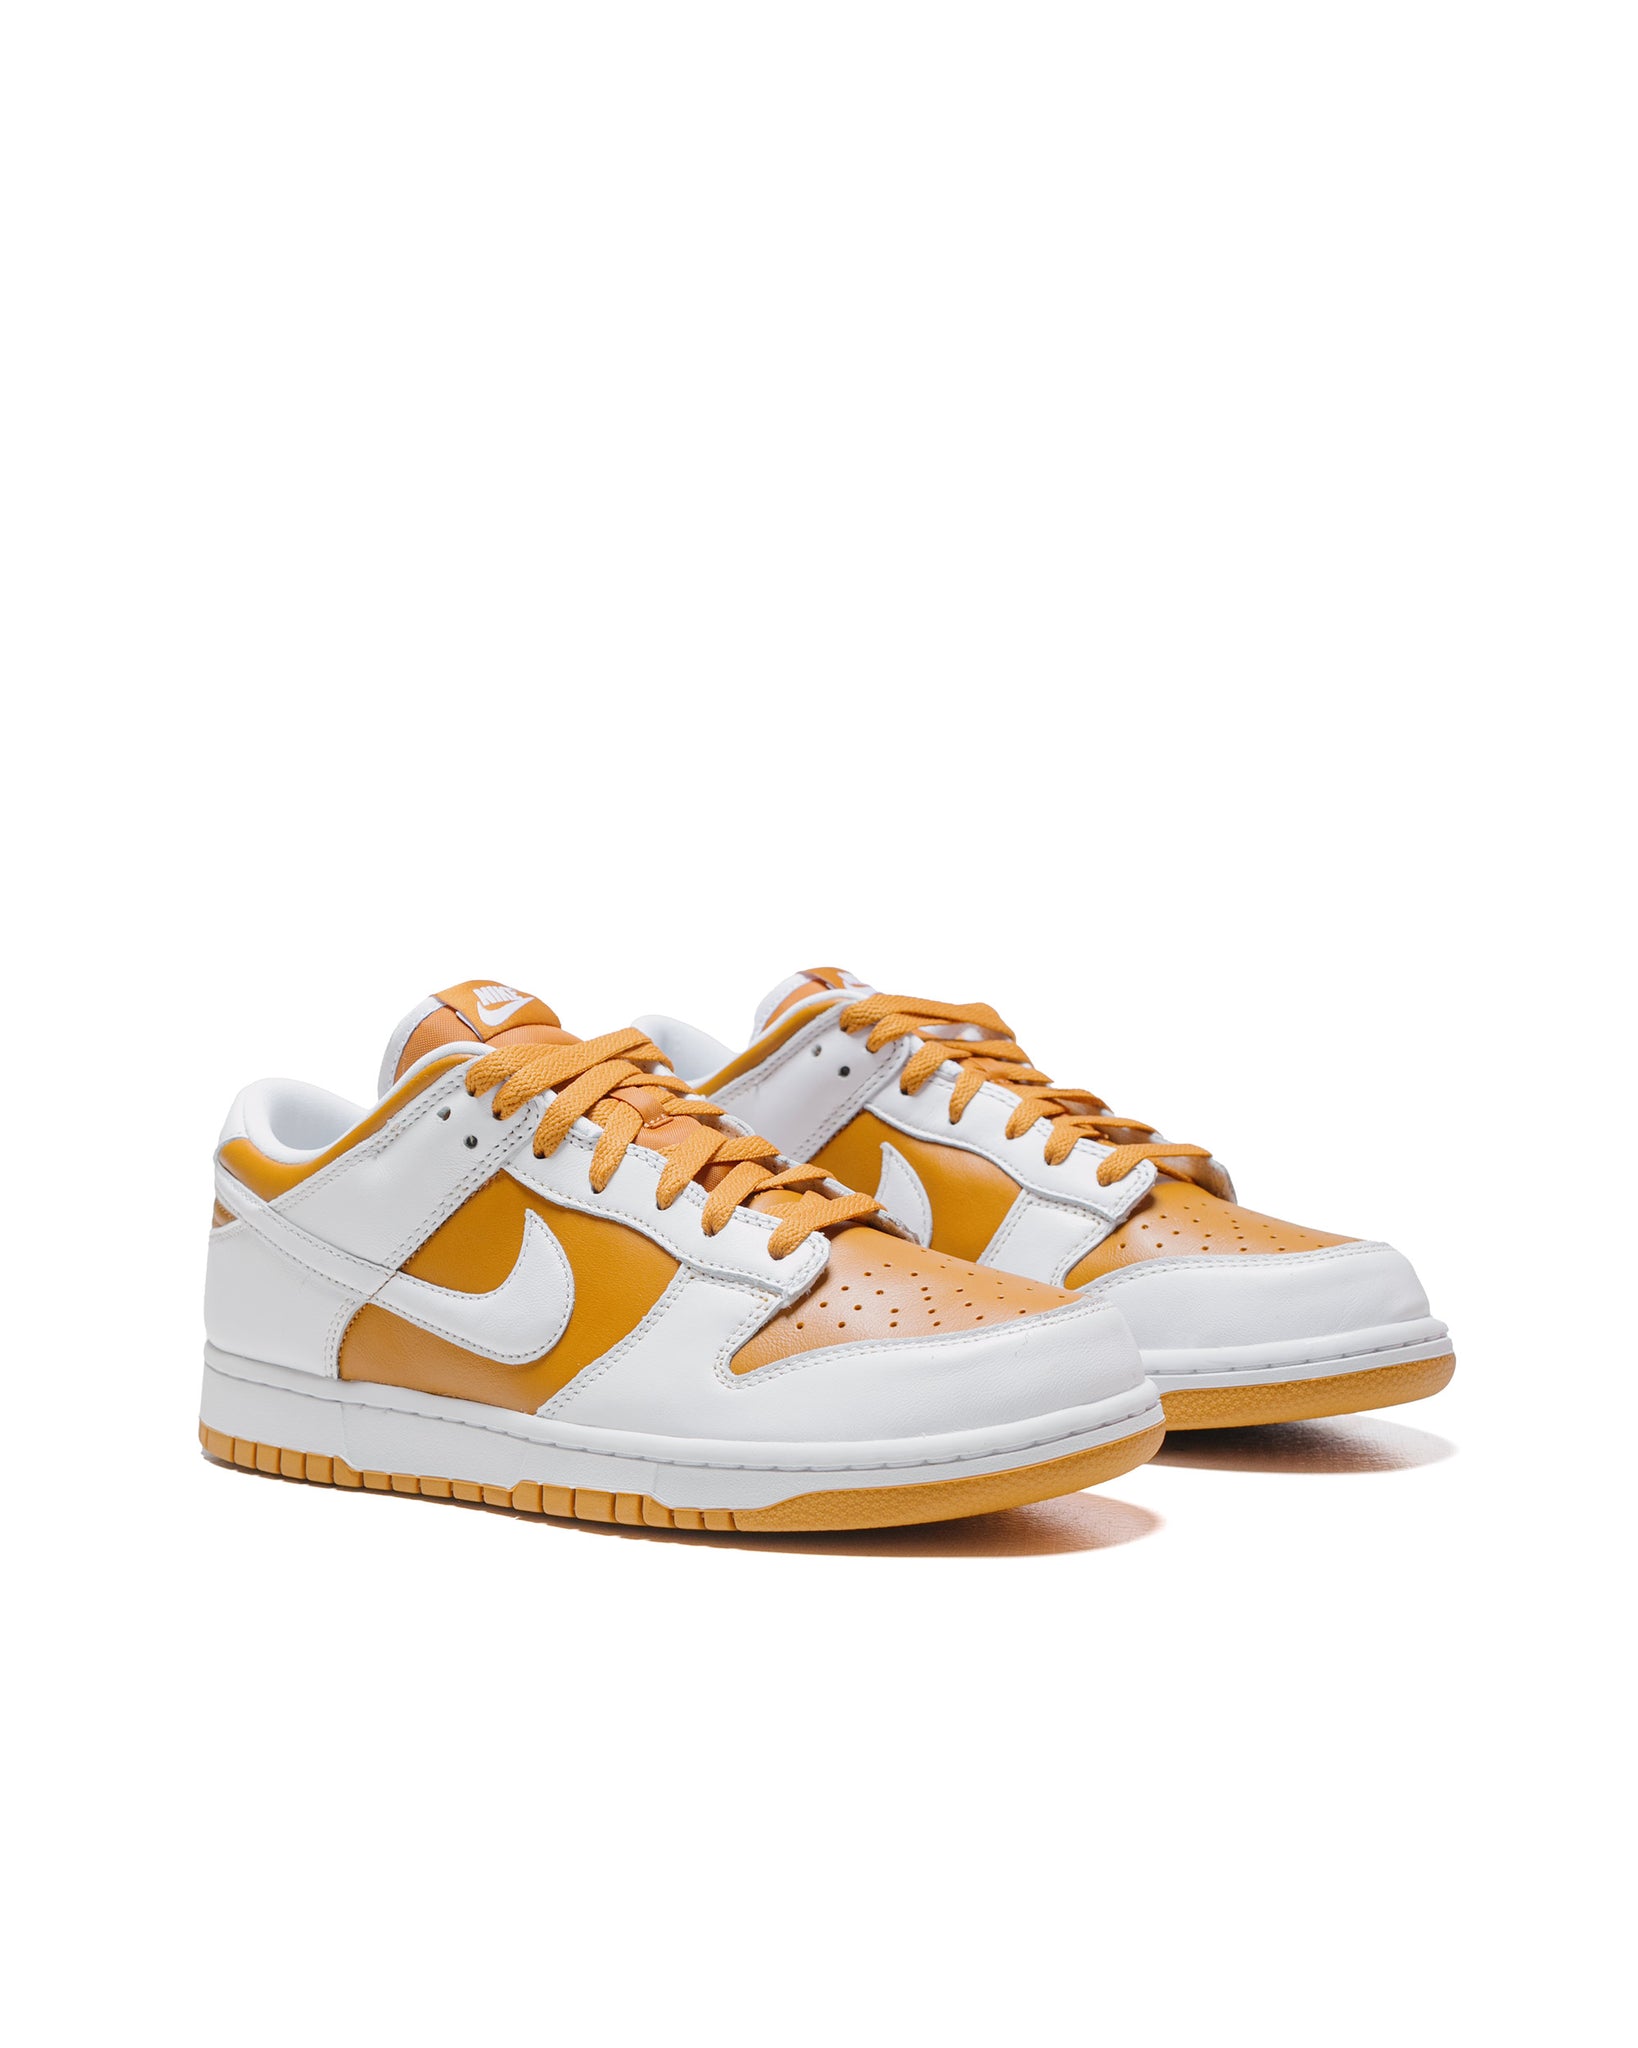 Nike Dunk Low Dark Curry/White side